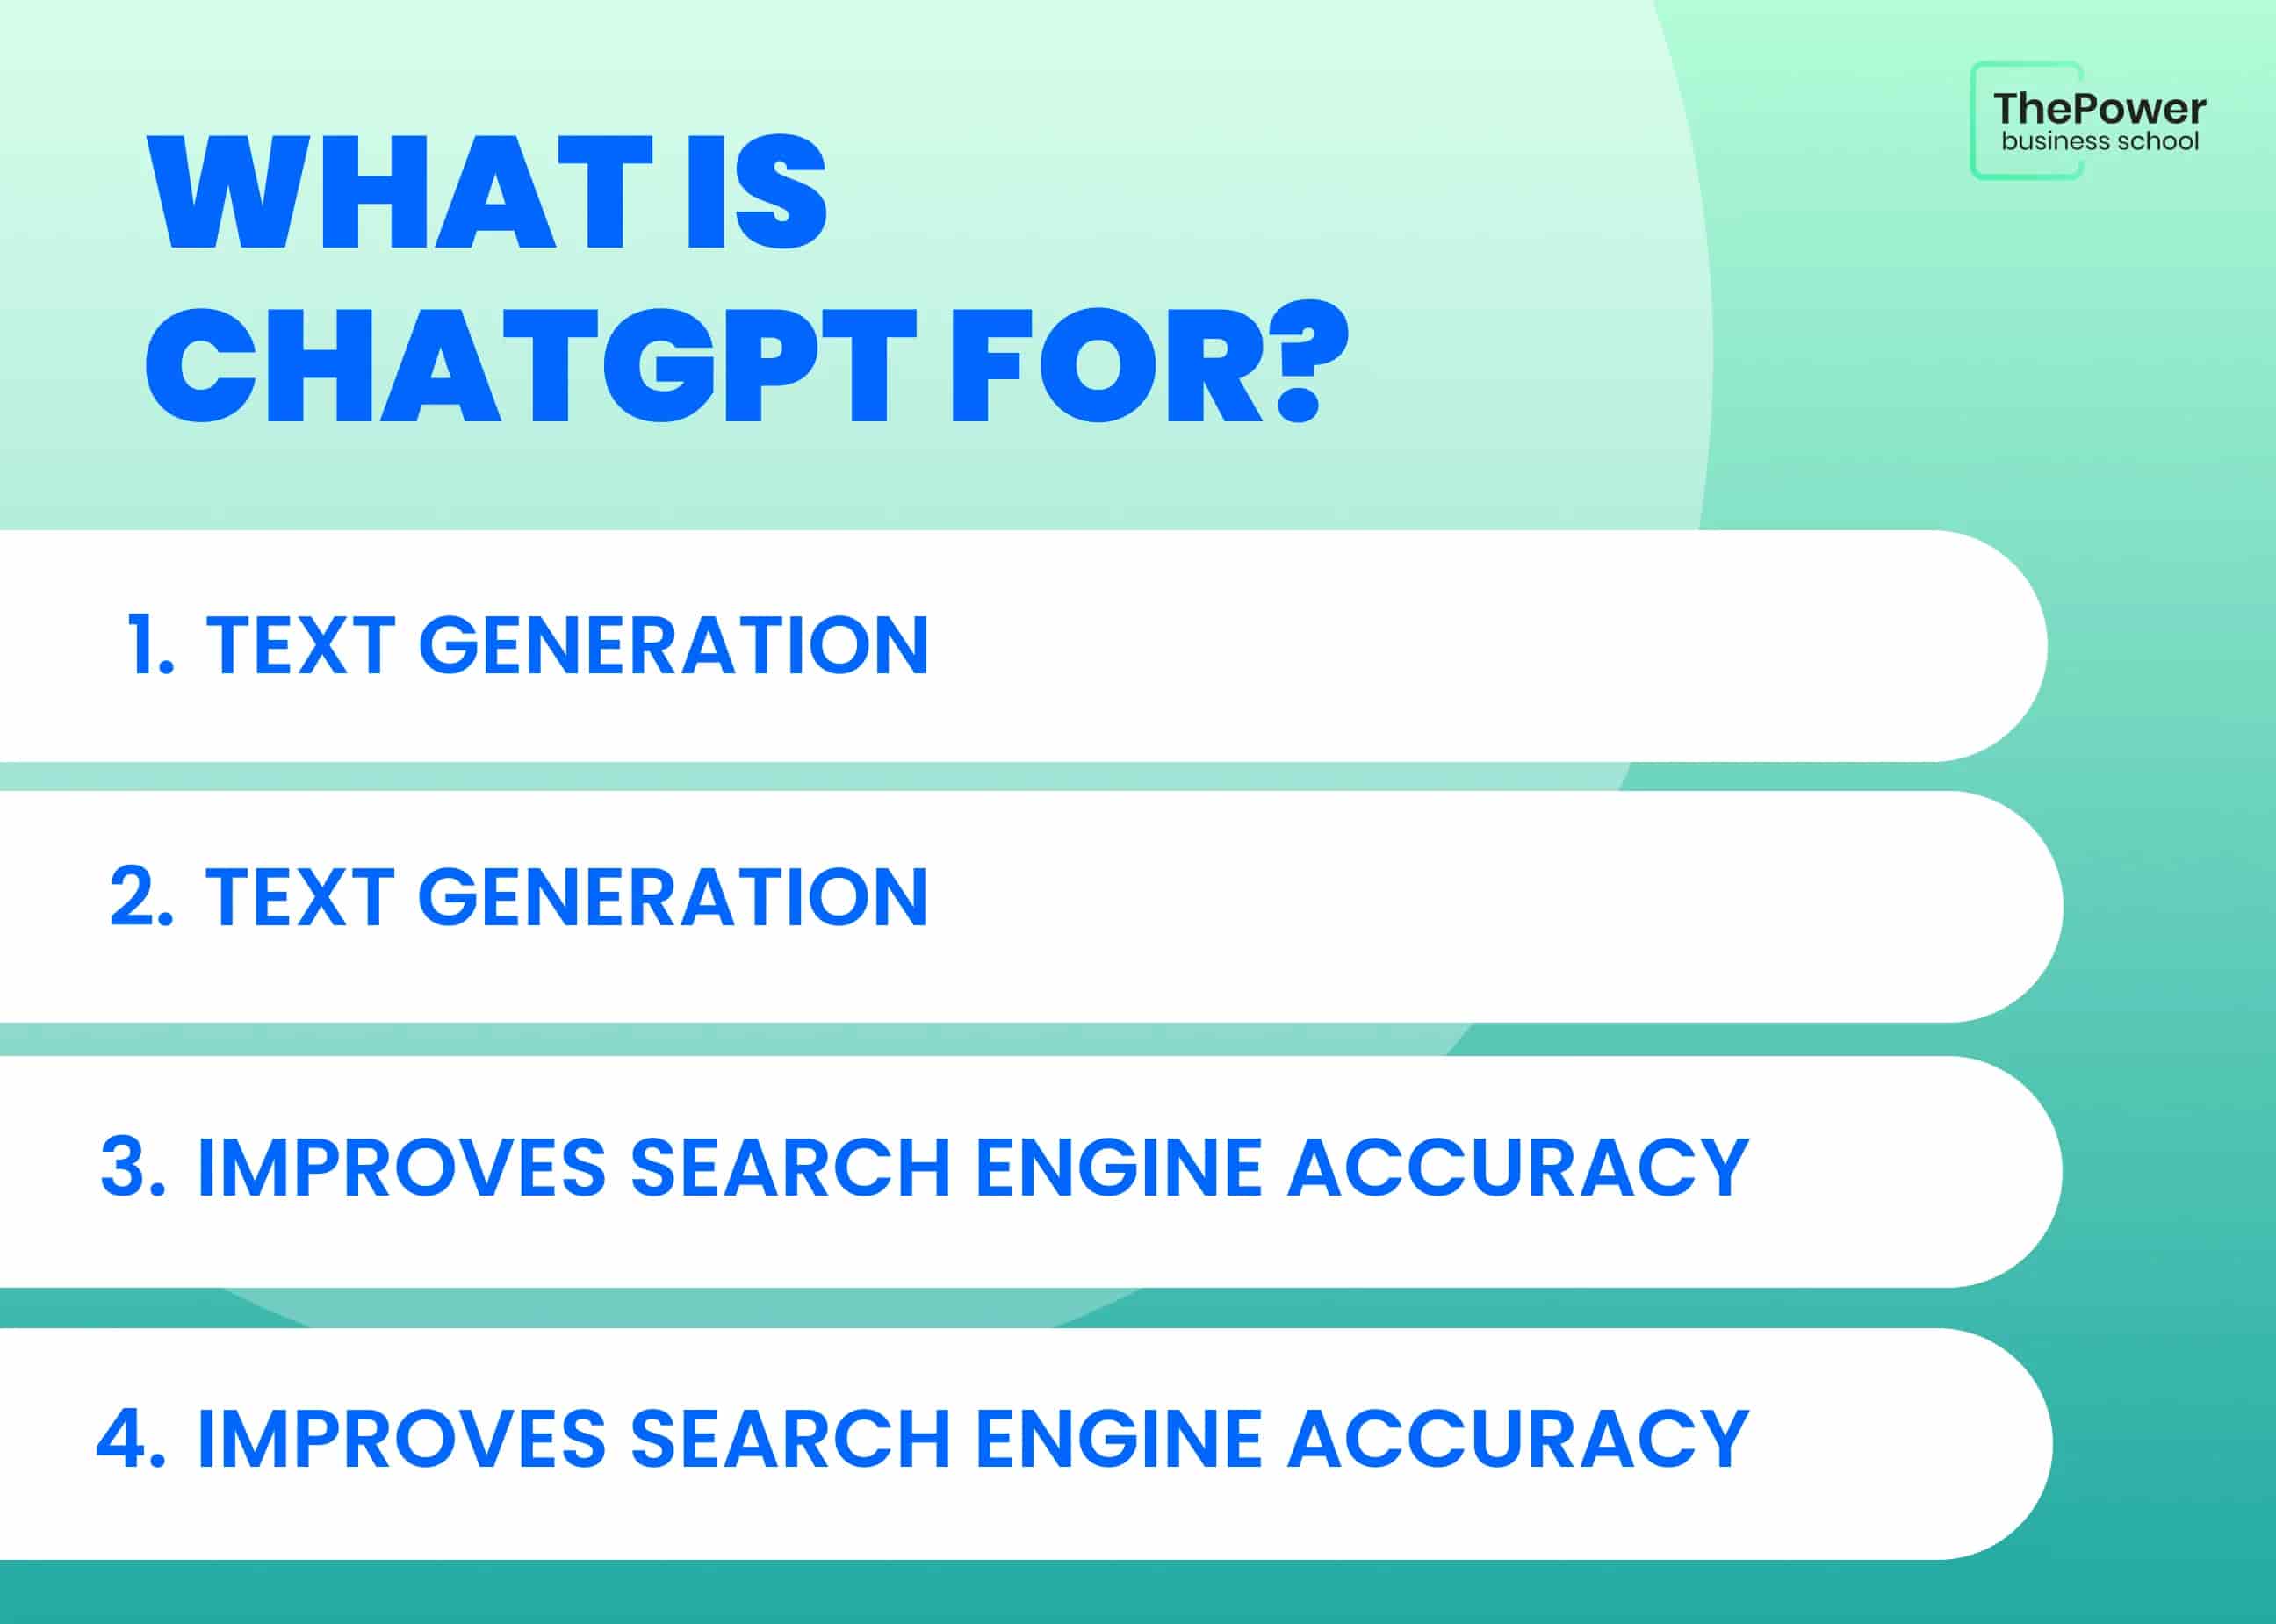 What is ChatGPT for